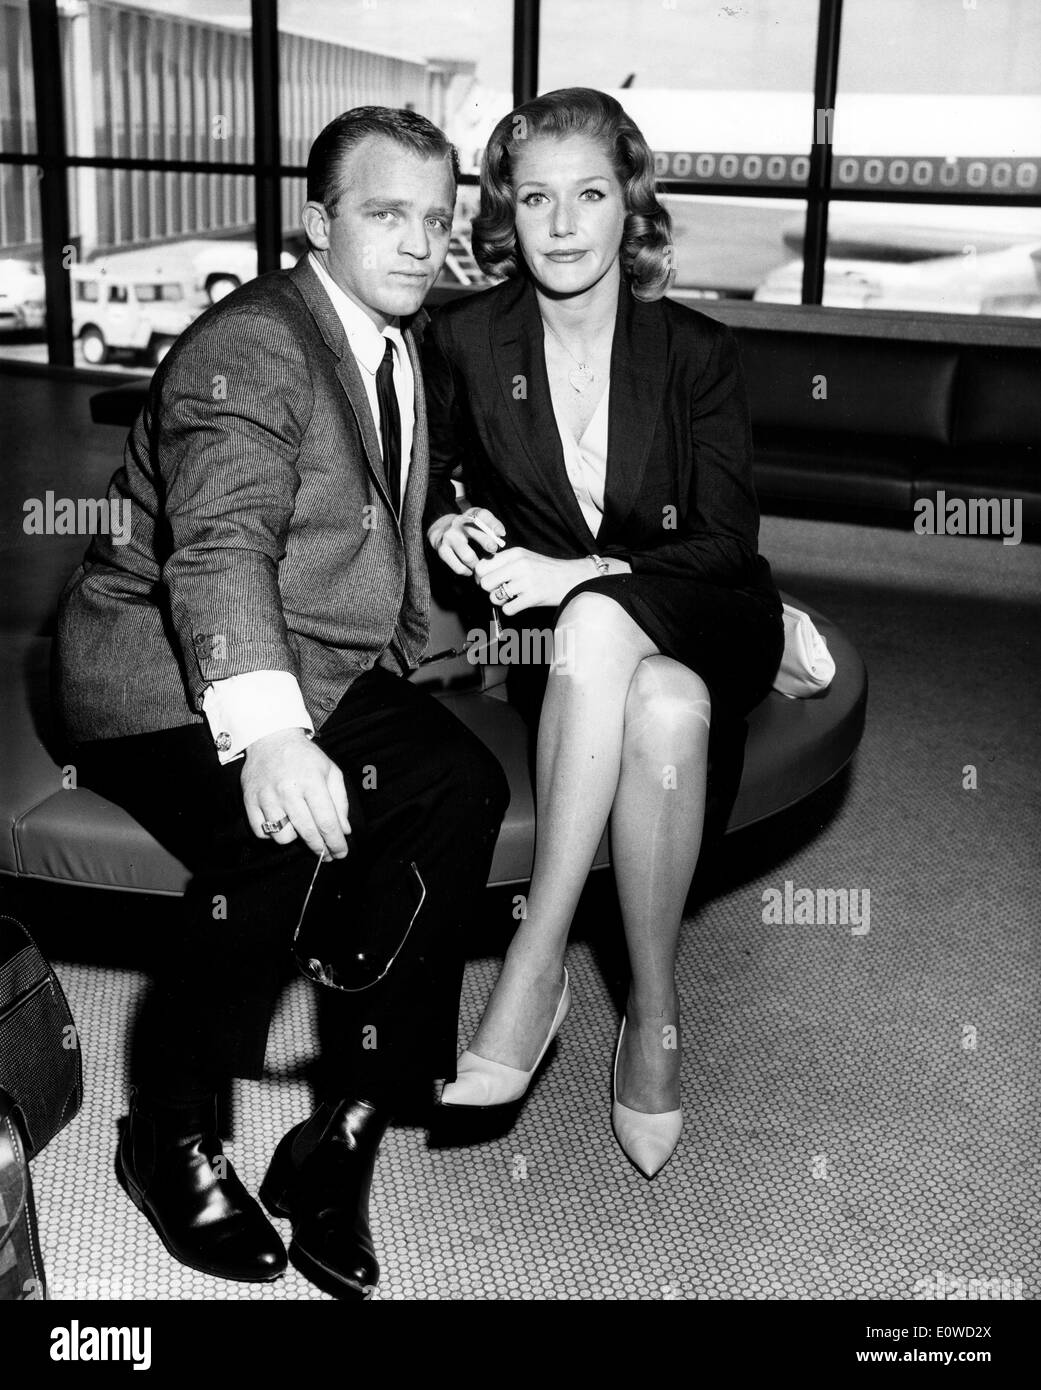 Gary Crosby sitting in the airport with a woman Stock Photo